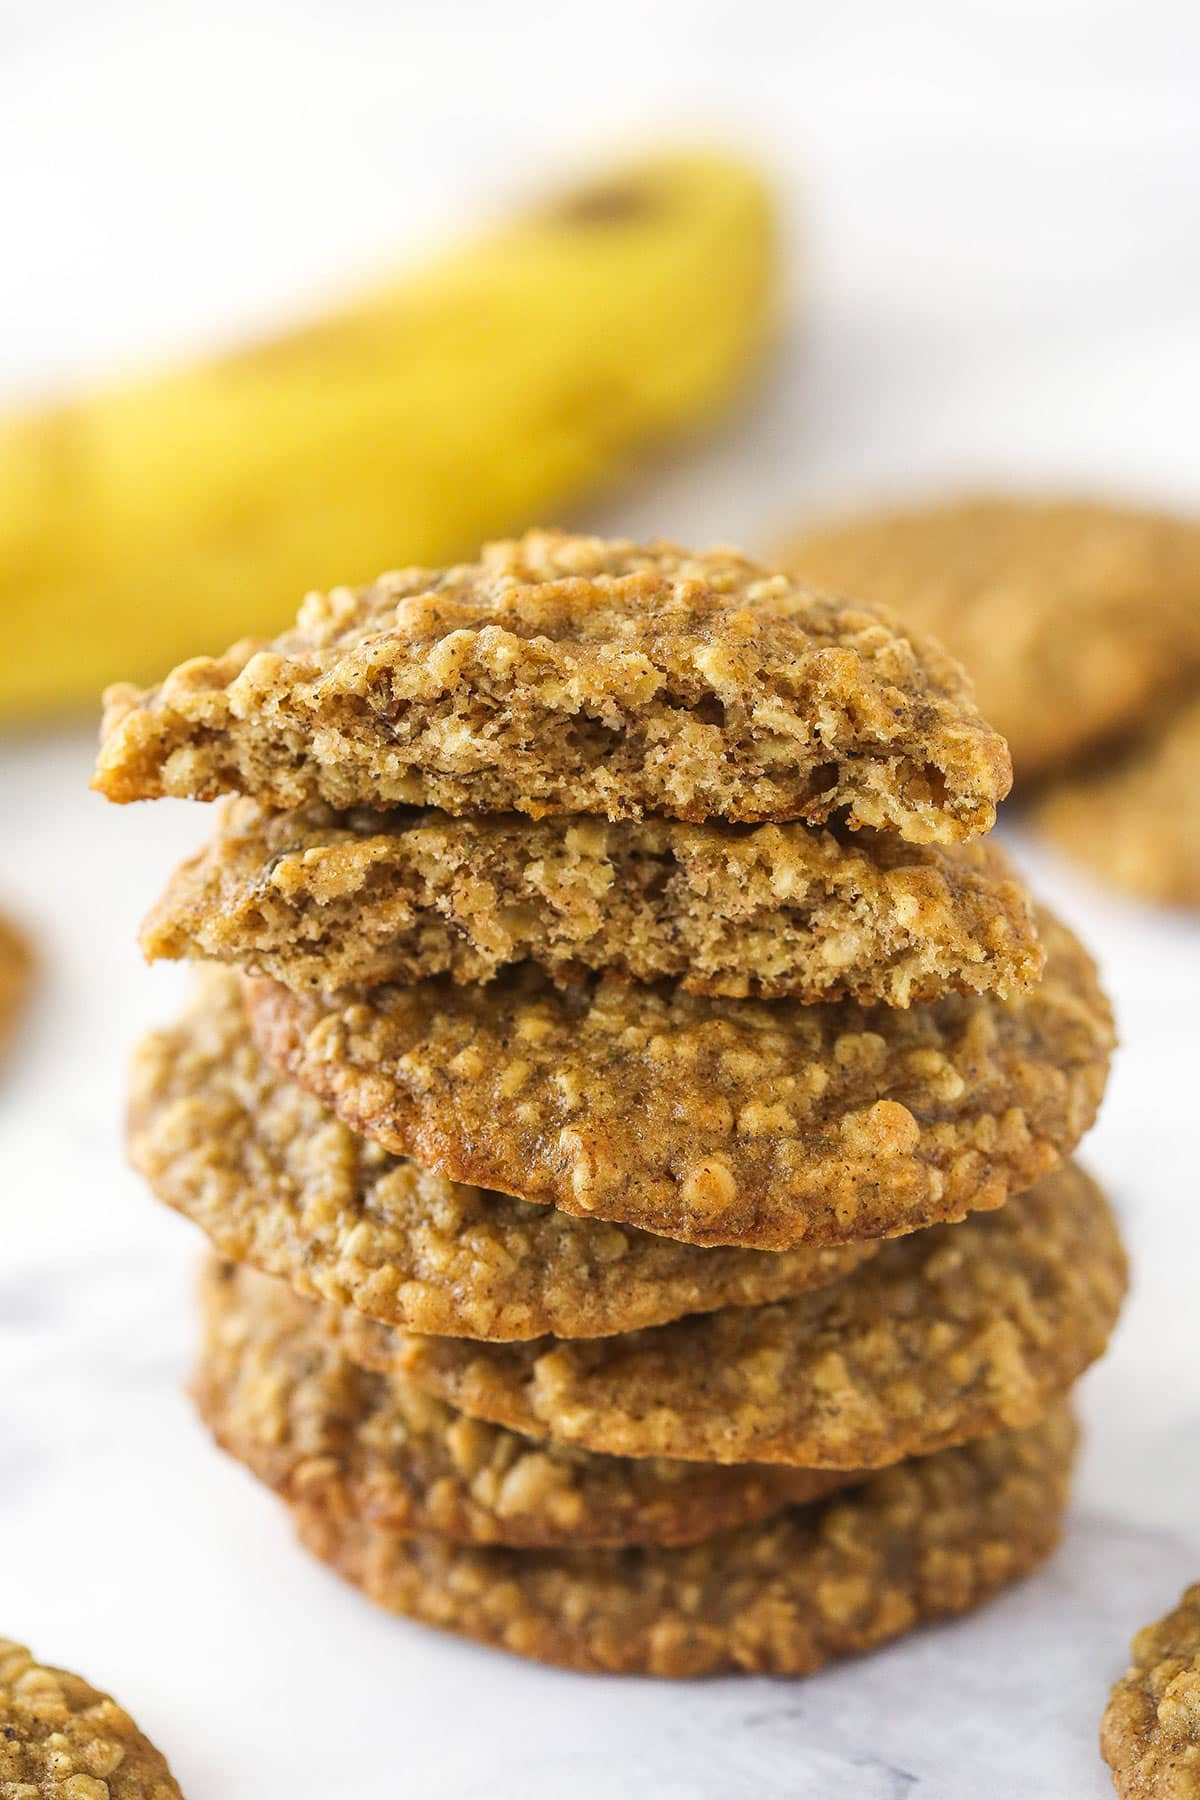 A stack of Moist and Chewy Banana Oatmeal Cookies with the top cookie broken in half to show texture.